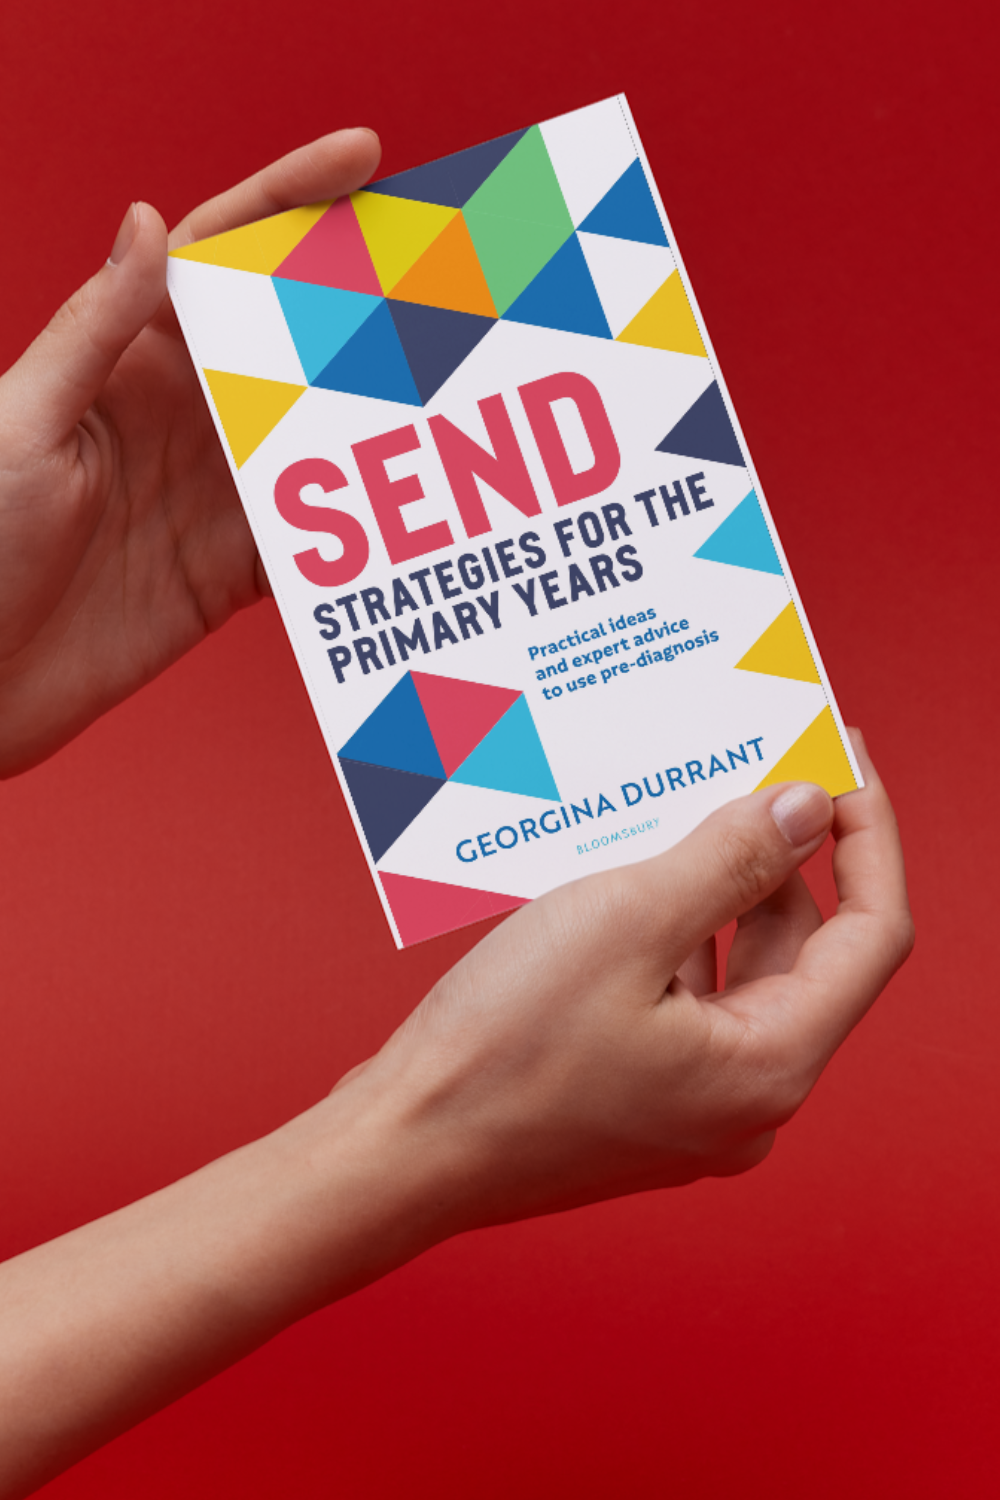 ‘SEND Strategies for the Primary Years’ by Georgina Durrant